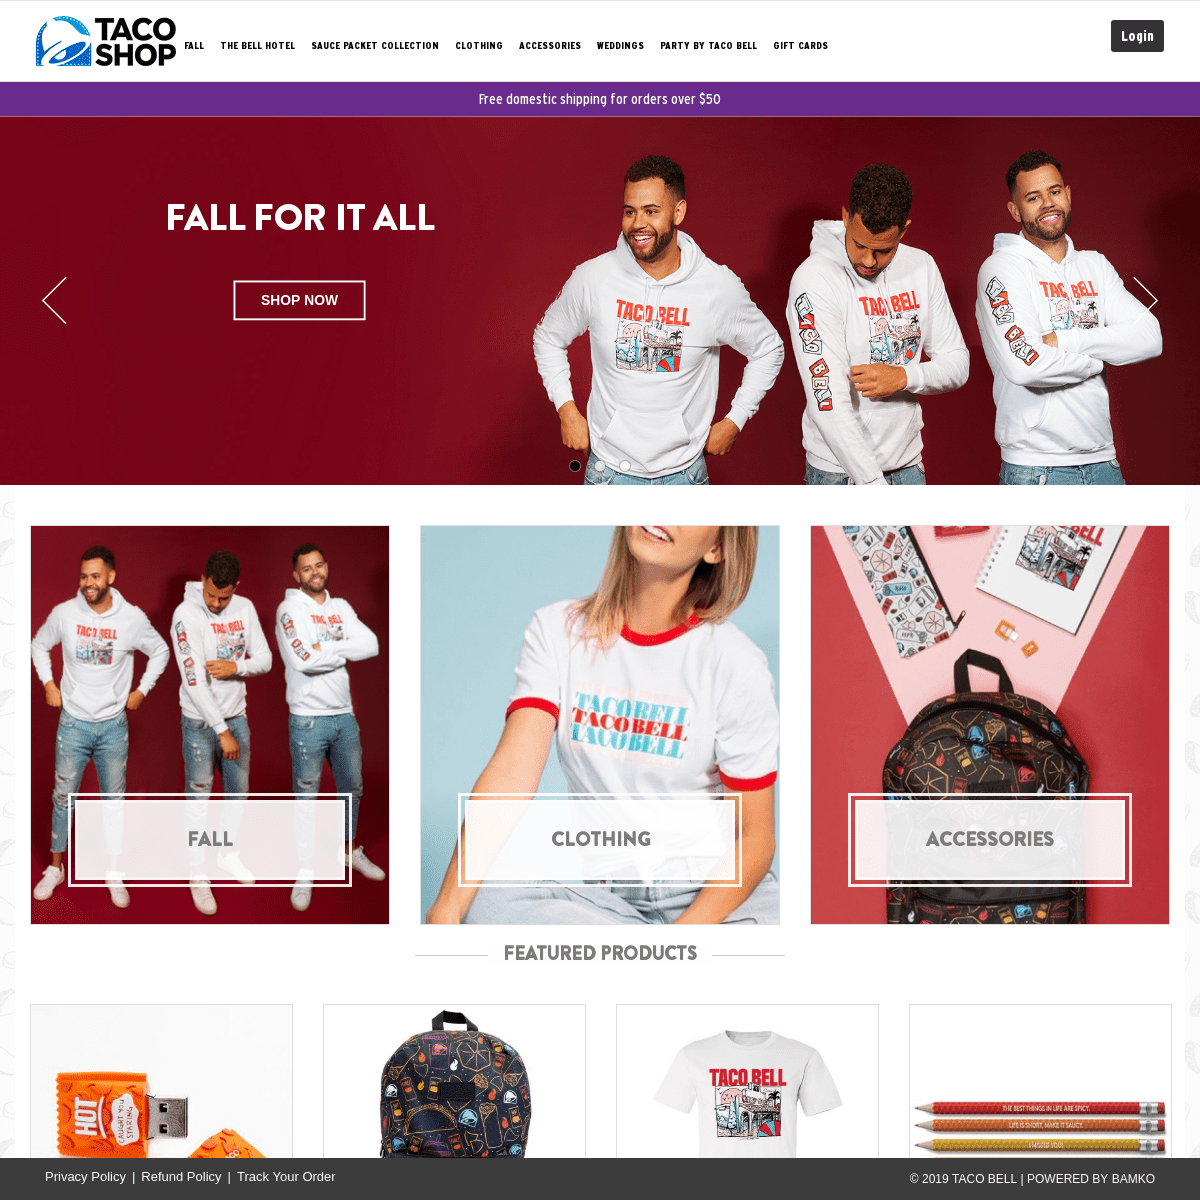 Taco Shop | OFFICIAL Taco Bell Merchandise, Apparel and Accessories